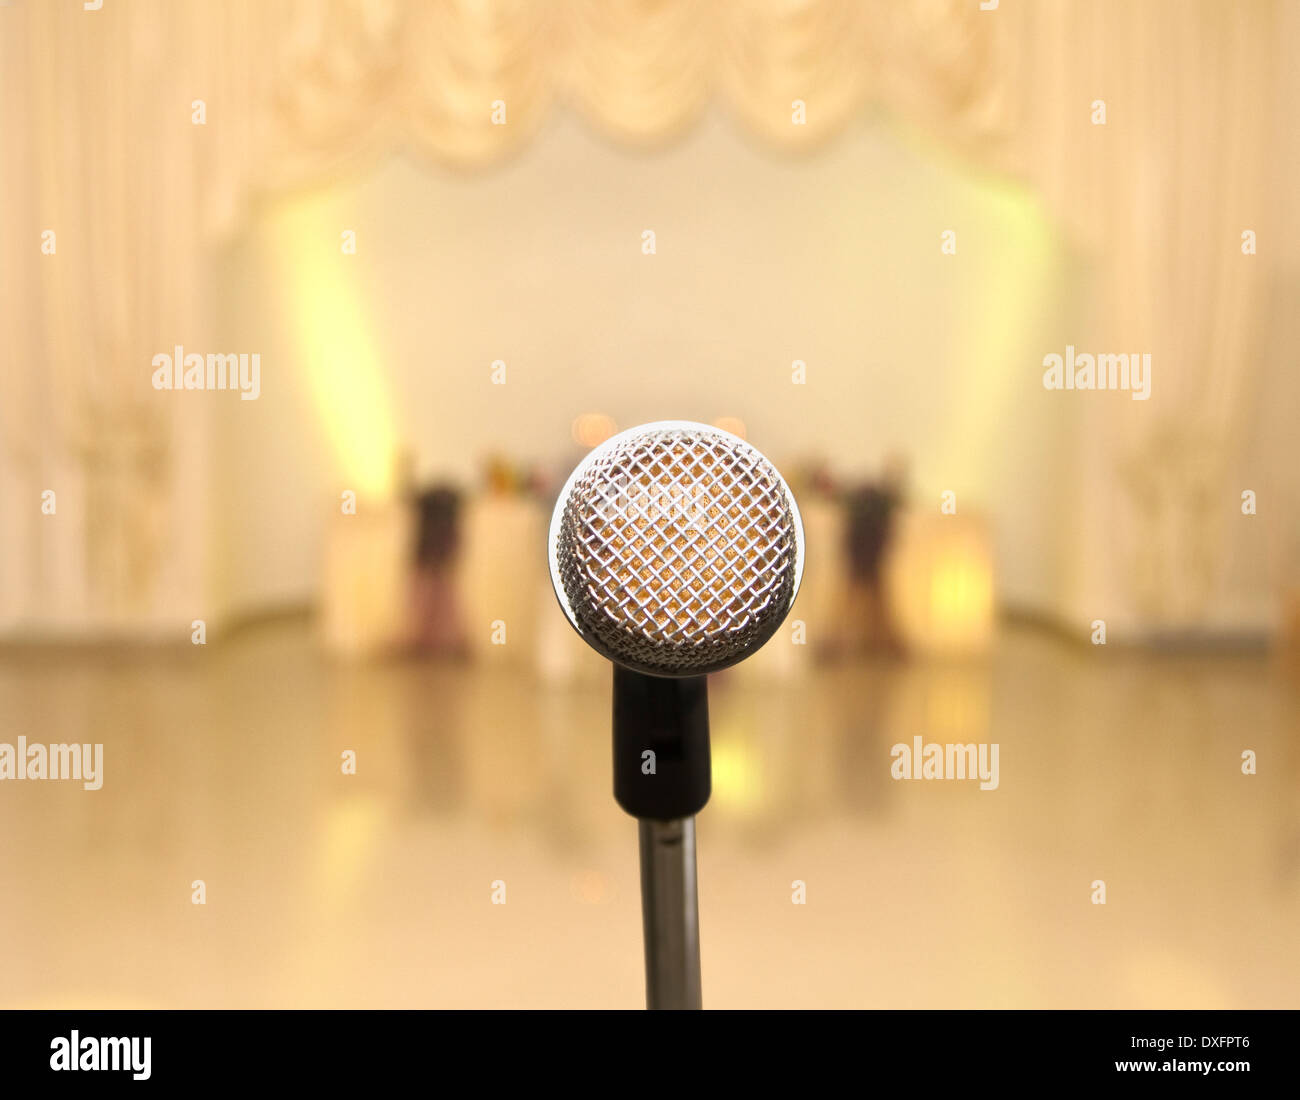 Microphone on Stage Facing Empty Auditorium Stock Photo